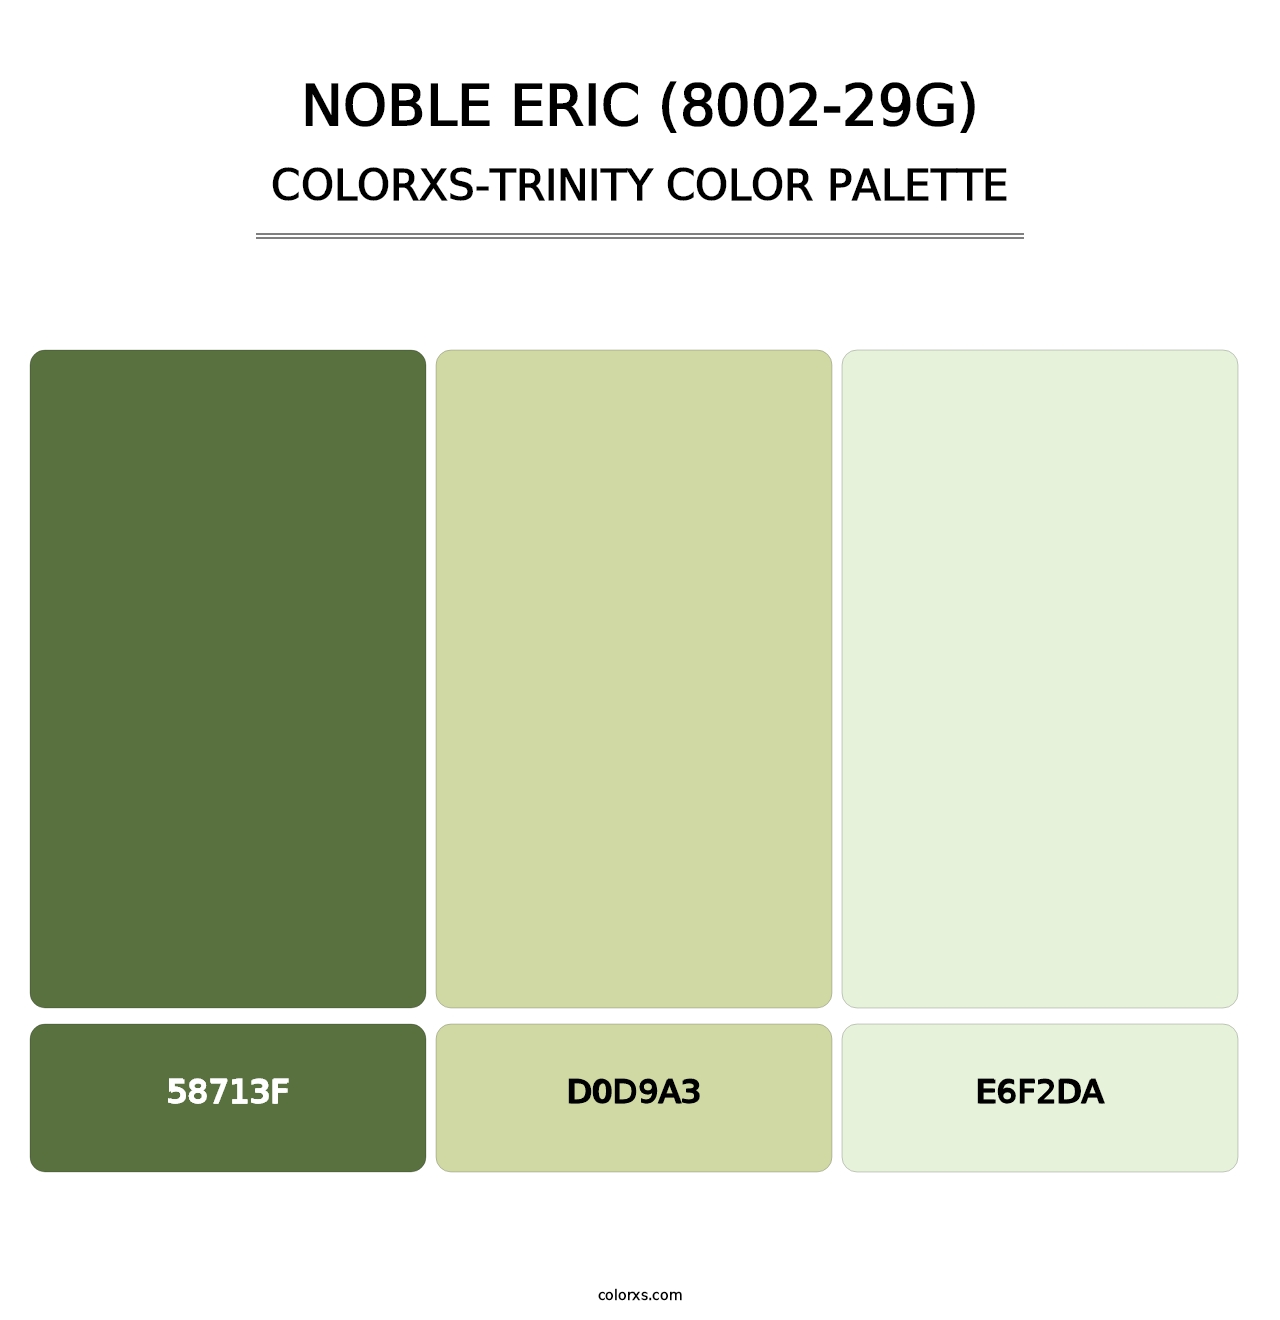 Noble Eric (8002-29G) - Colorxs Trinity Palette